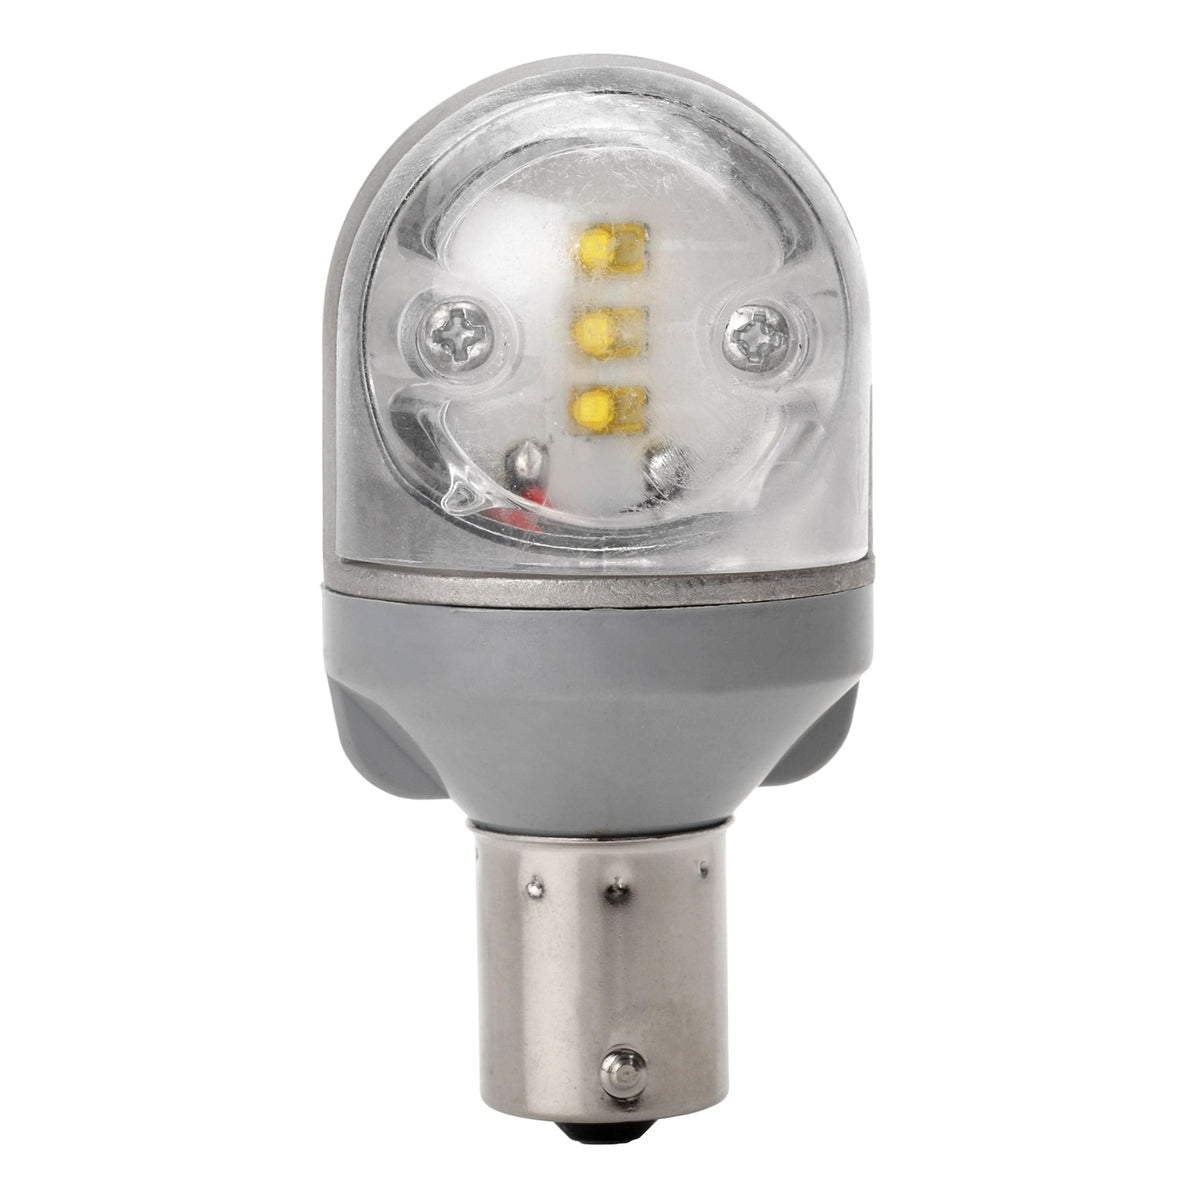 AP Products Qualifies for Free Shipping AP Products Star Lights 12v Exterior Bulb 350 Lumens #016-1141-350